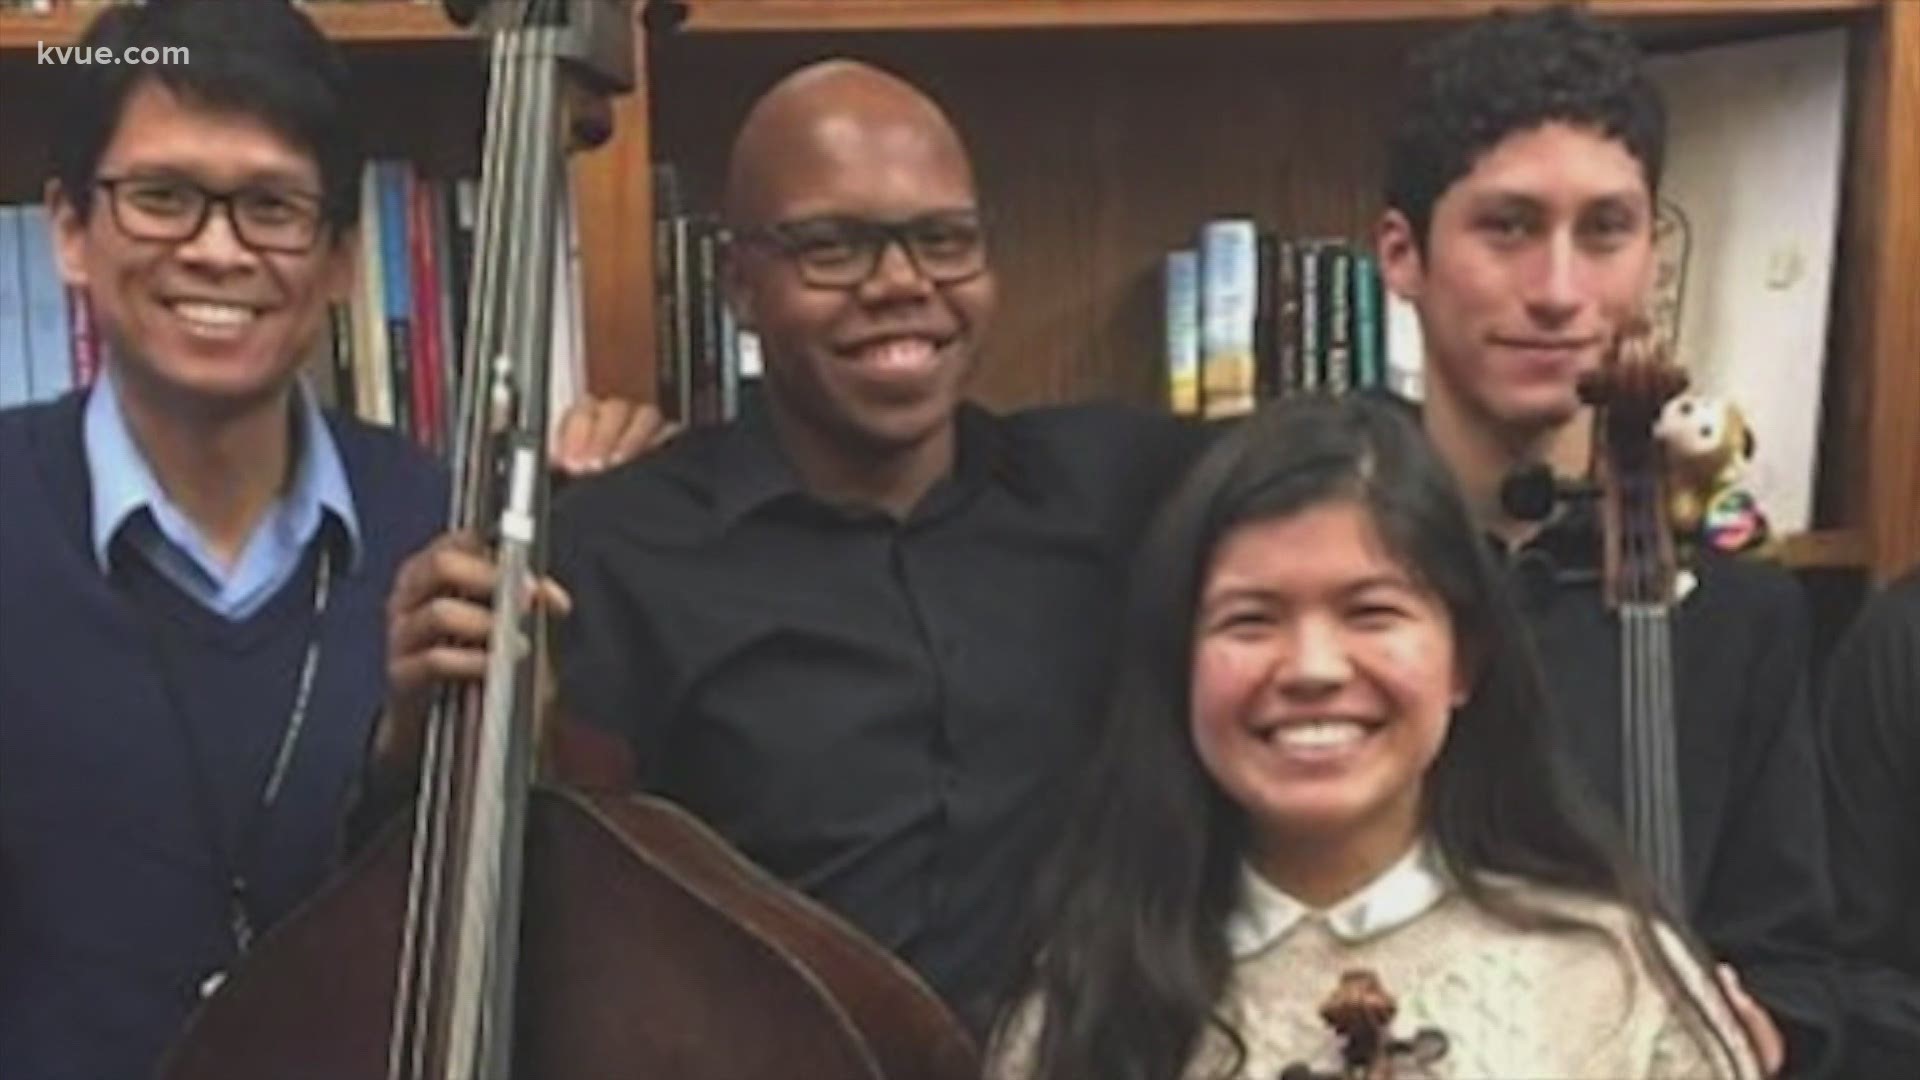 Austin radio station KMFA is honoring Draylen Mason with a new performance space. The teen's life came to a tragic end in 2018.